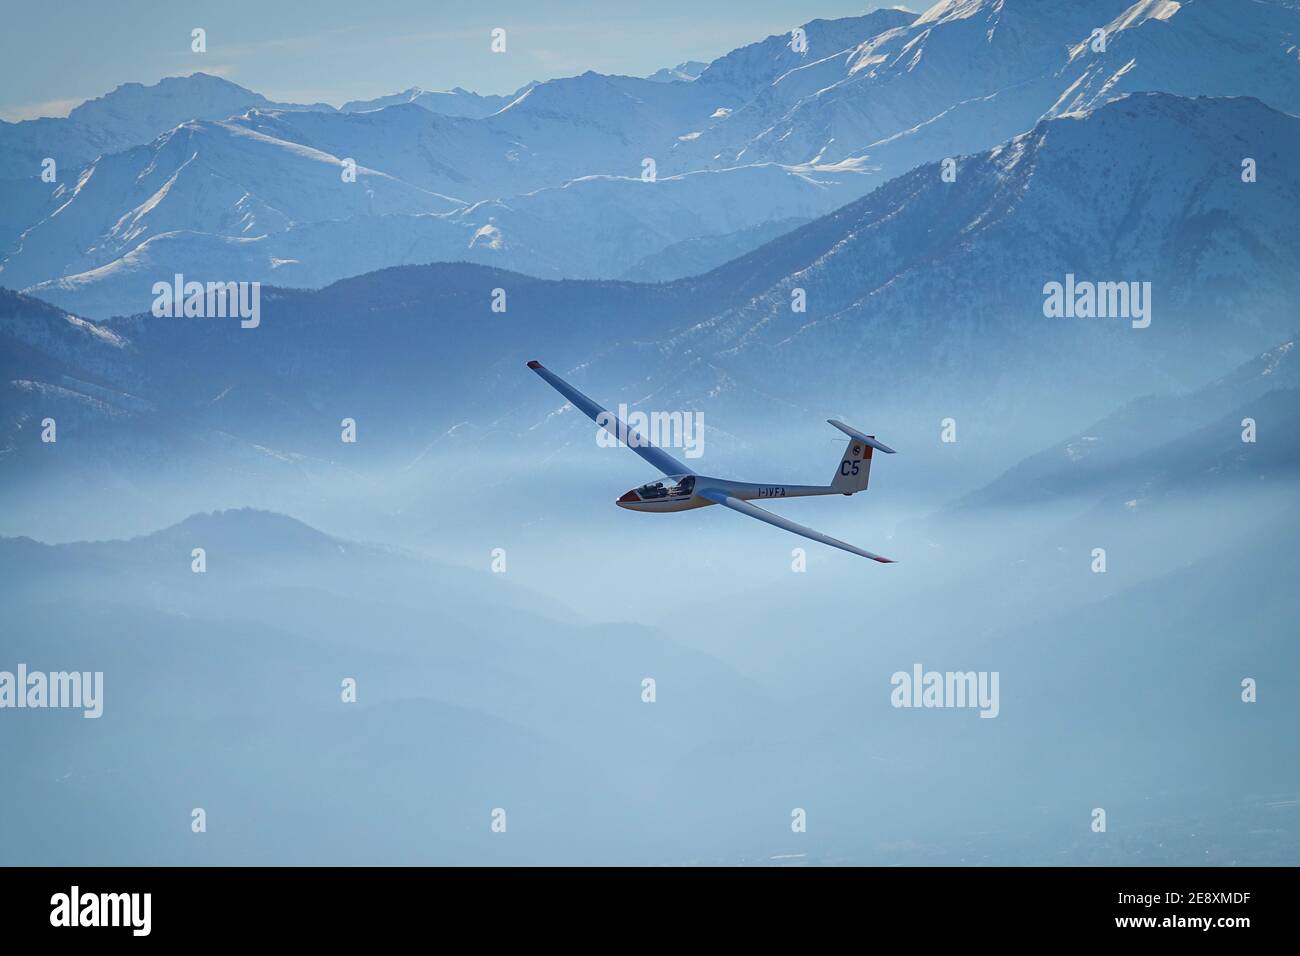 Glider in flight between snowy mountains seen from above. Susa, Italy - January 2021 Stock Photo